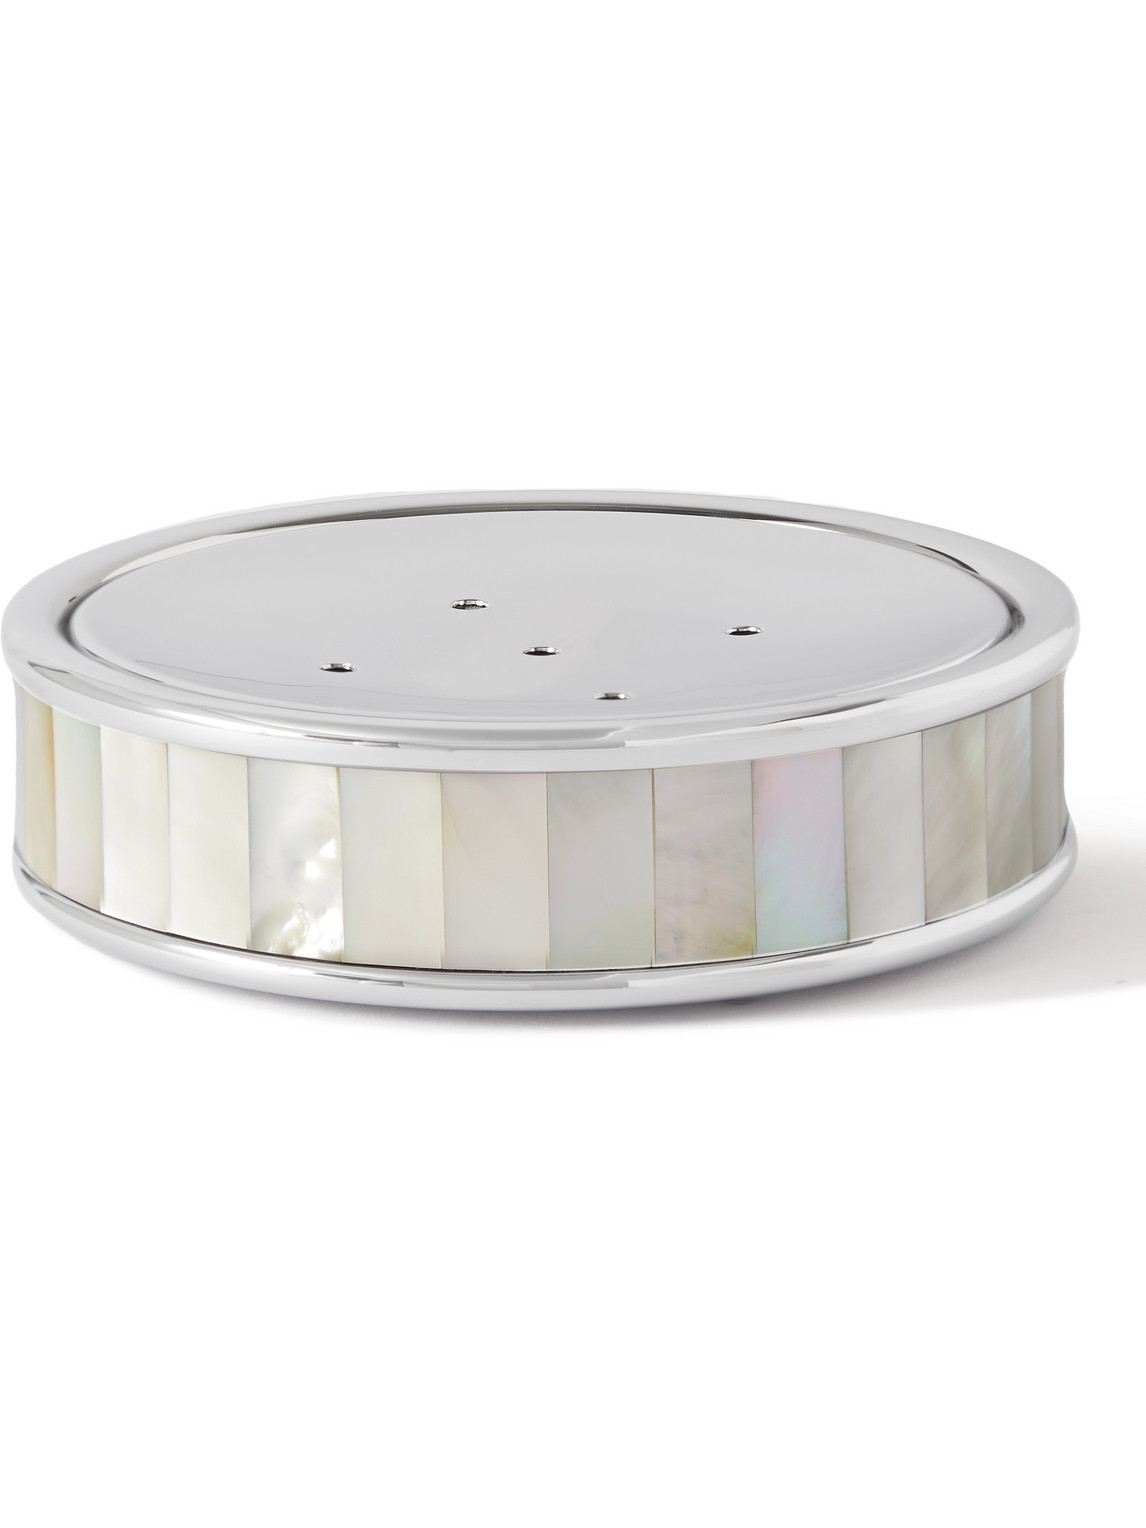 Lorenzi Milano Stainless Steel, Mother-of-pearl And Chrome-plated Soap Tray In Grey